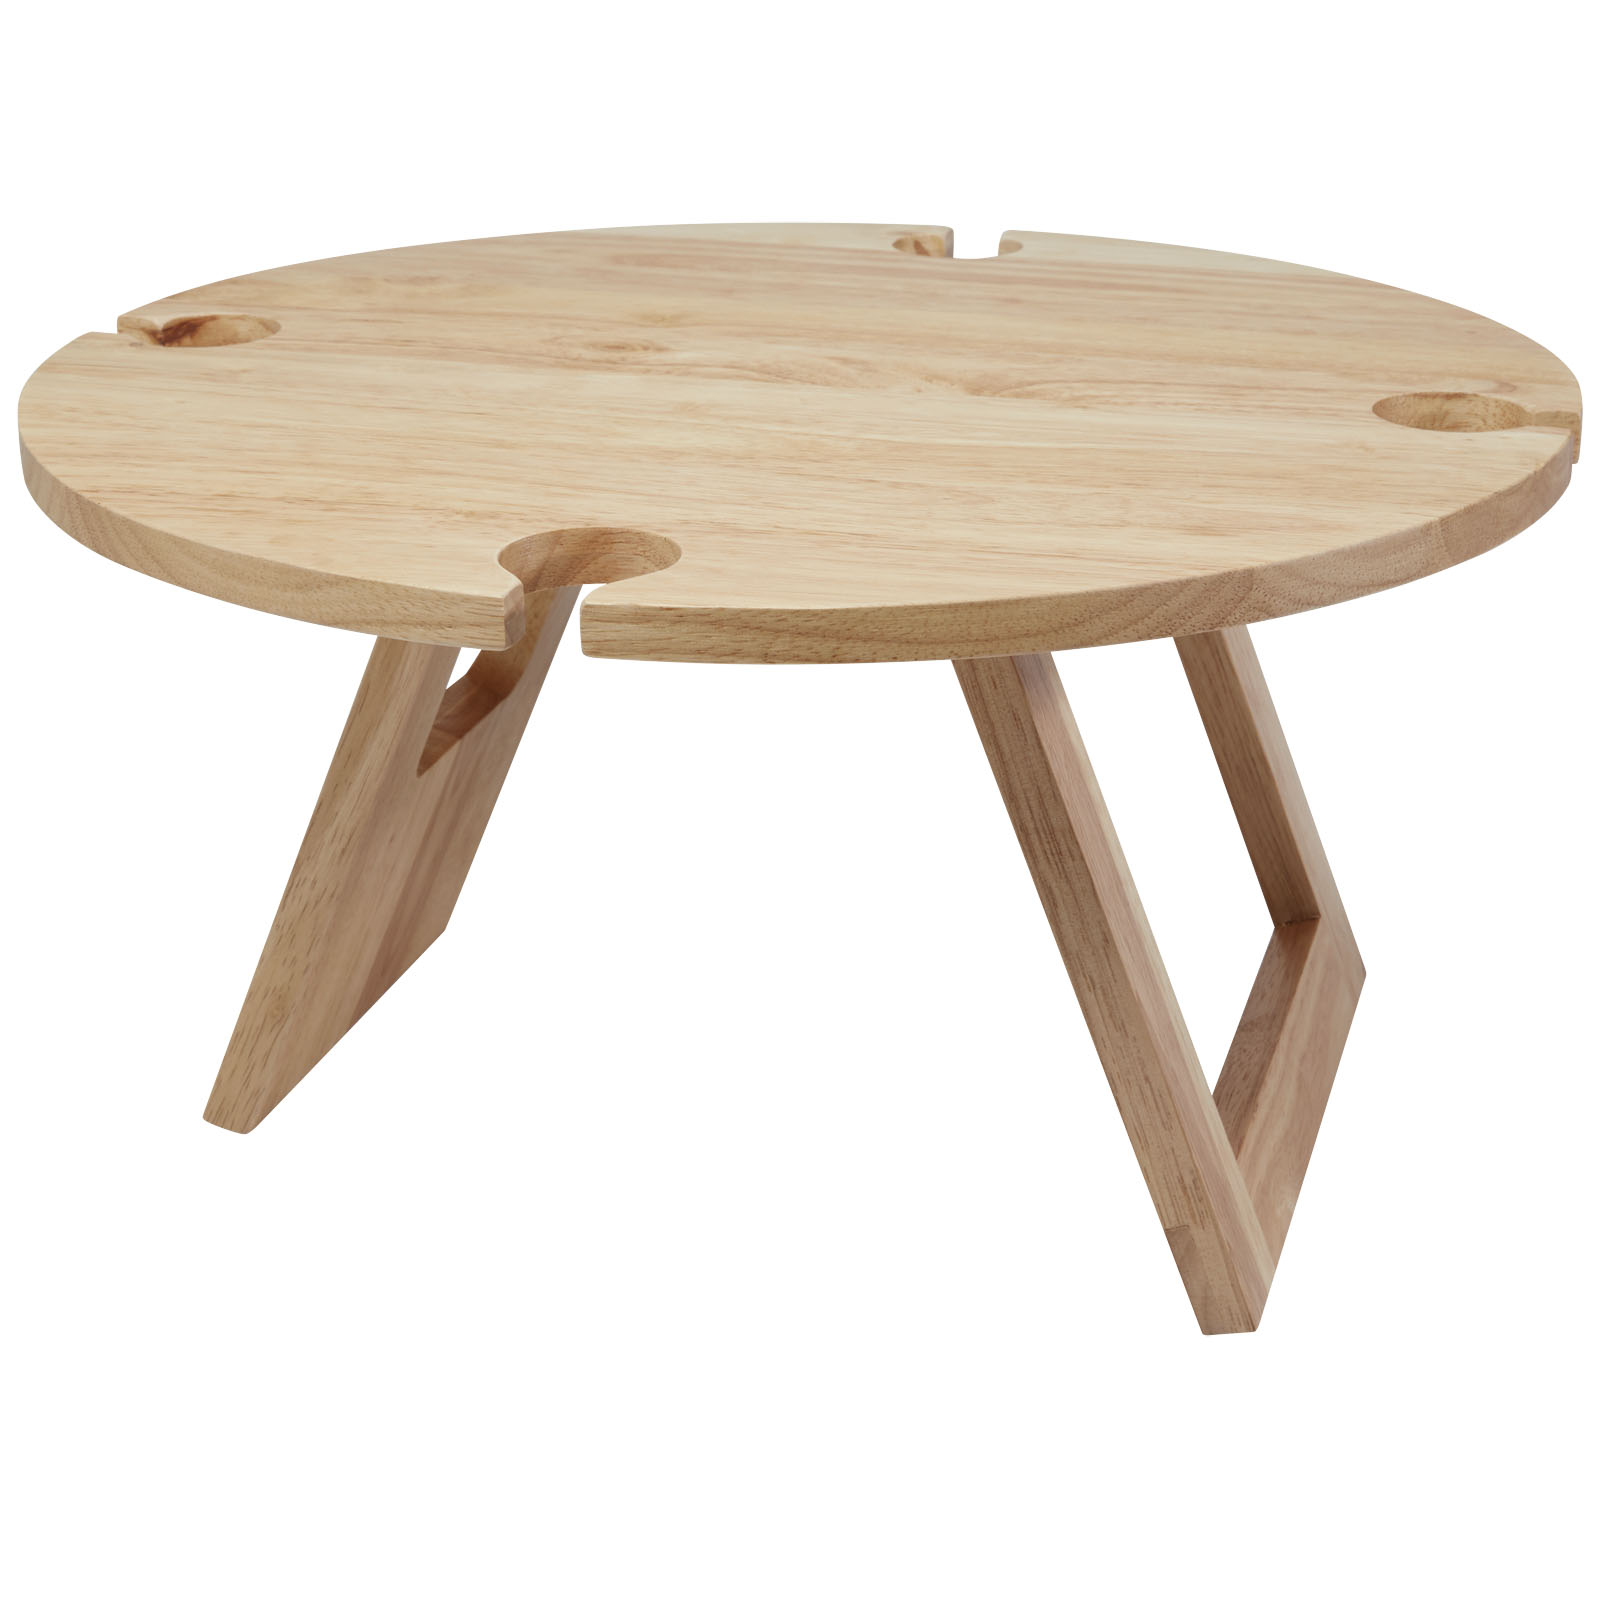 Sports & Leisure - Soll foldable picnic table